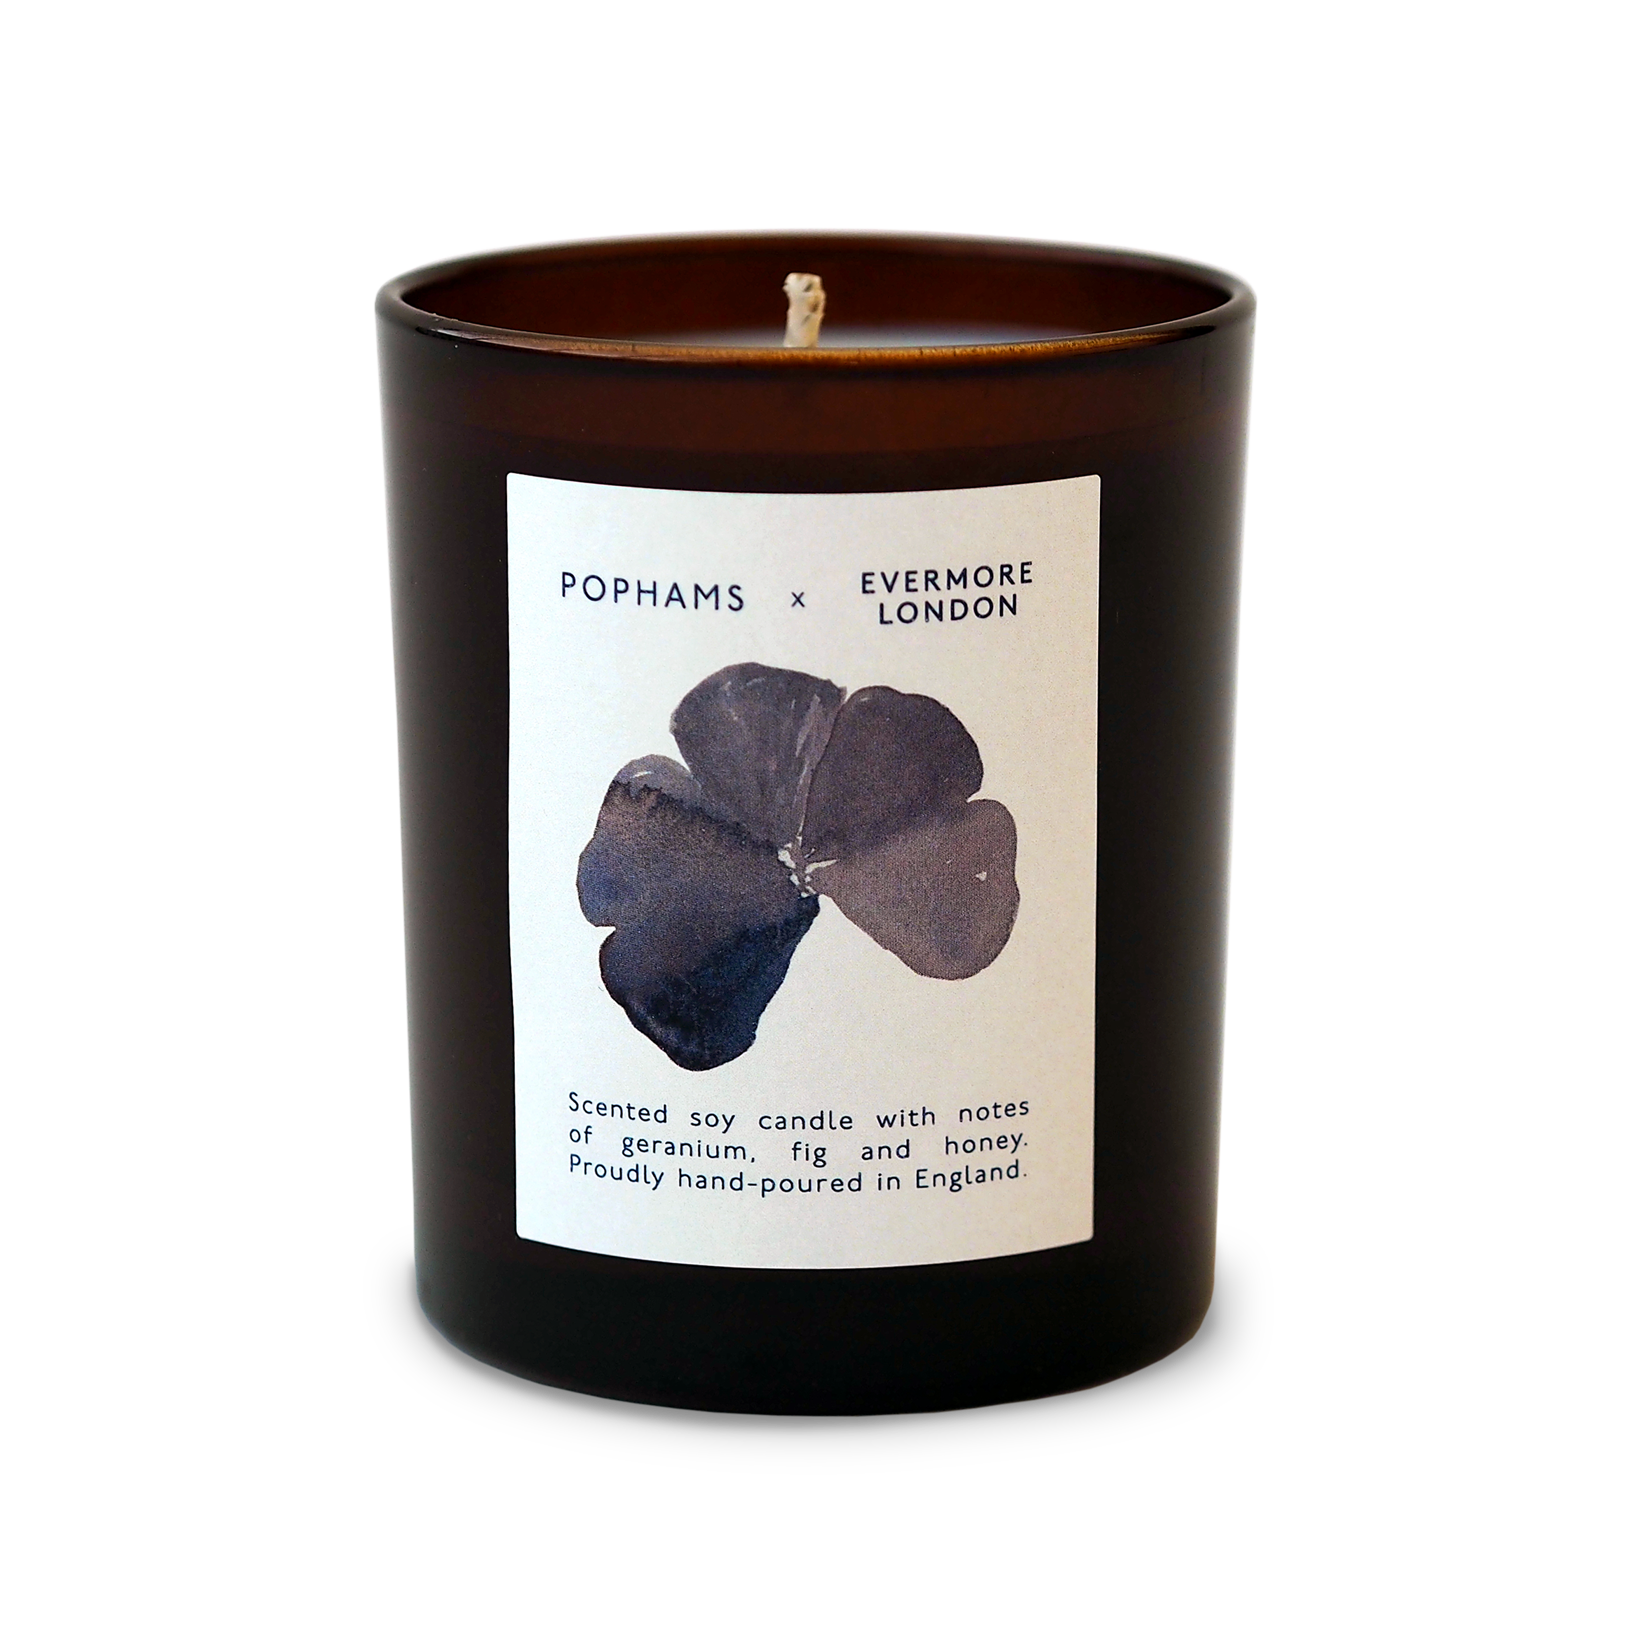 Evermore_Pophams_Candle_Front.png